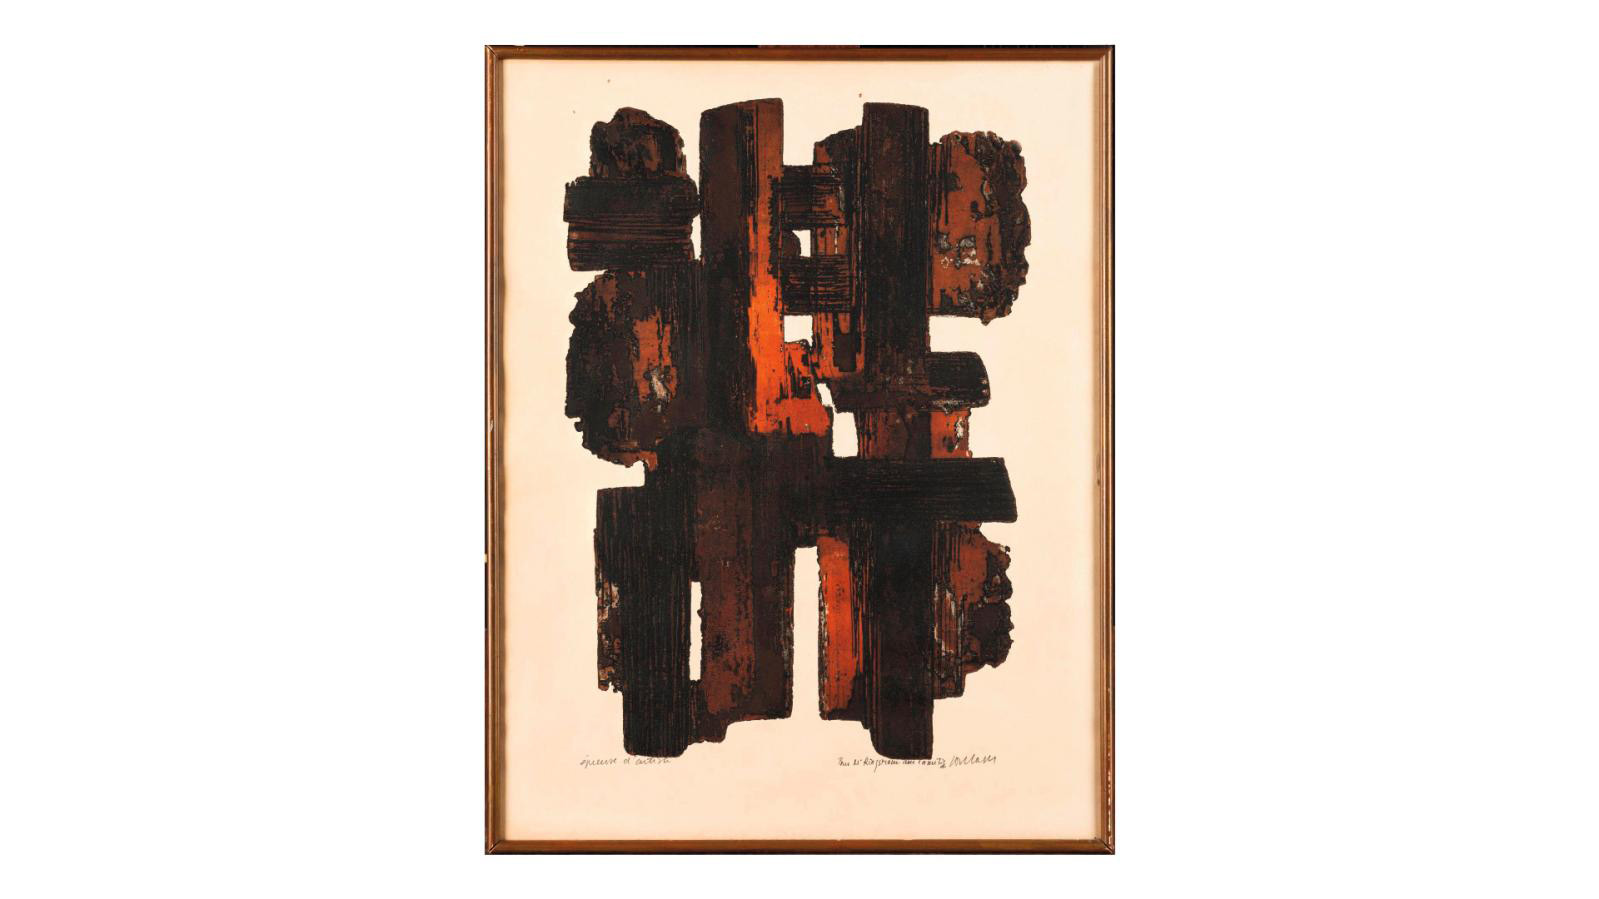 Prints by Soulages